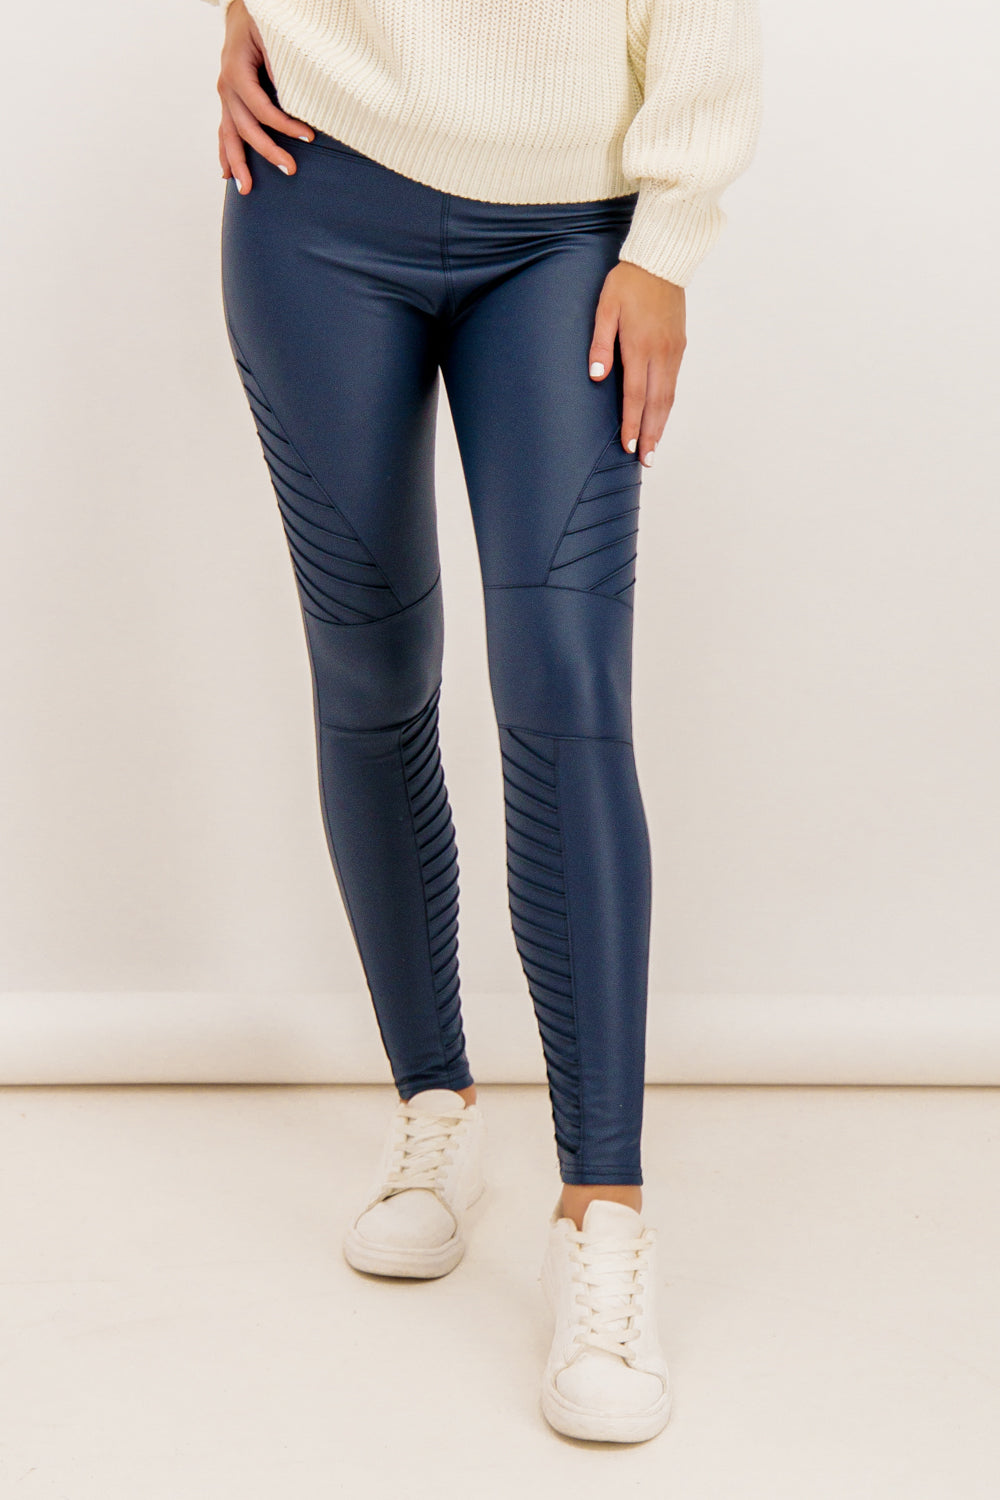 Ribbed leggings with fleece lining in black, 12.99€